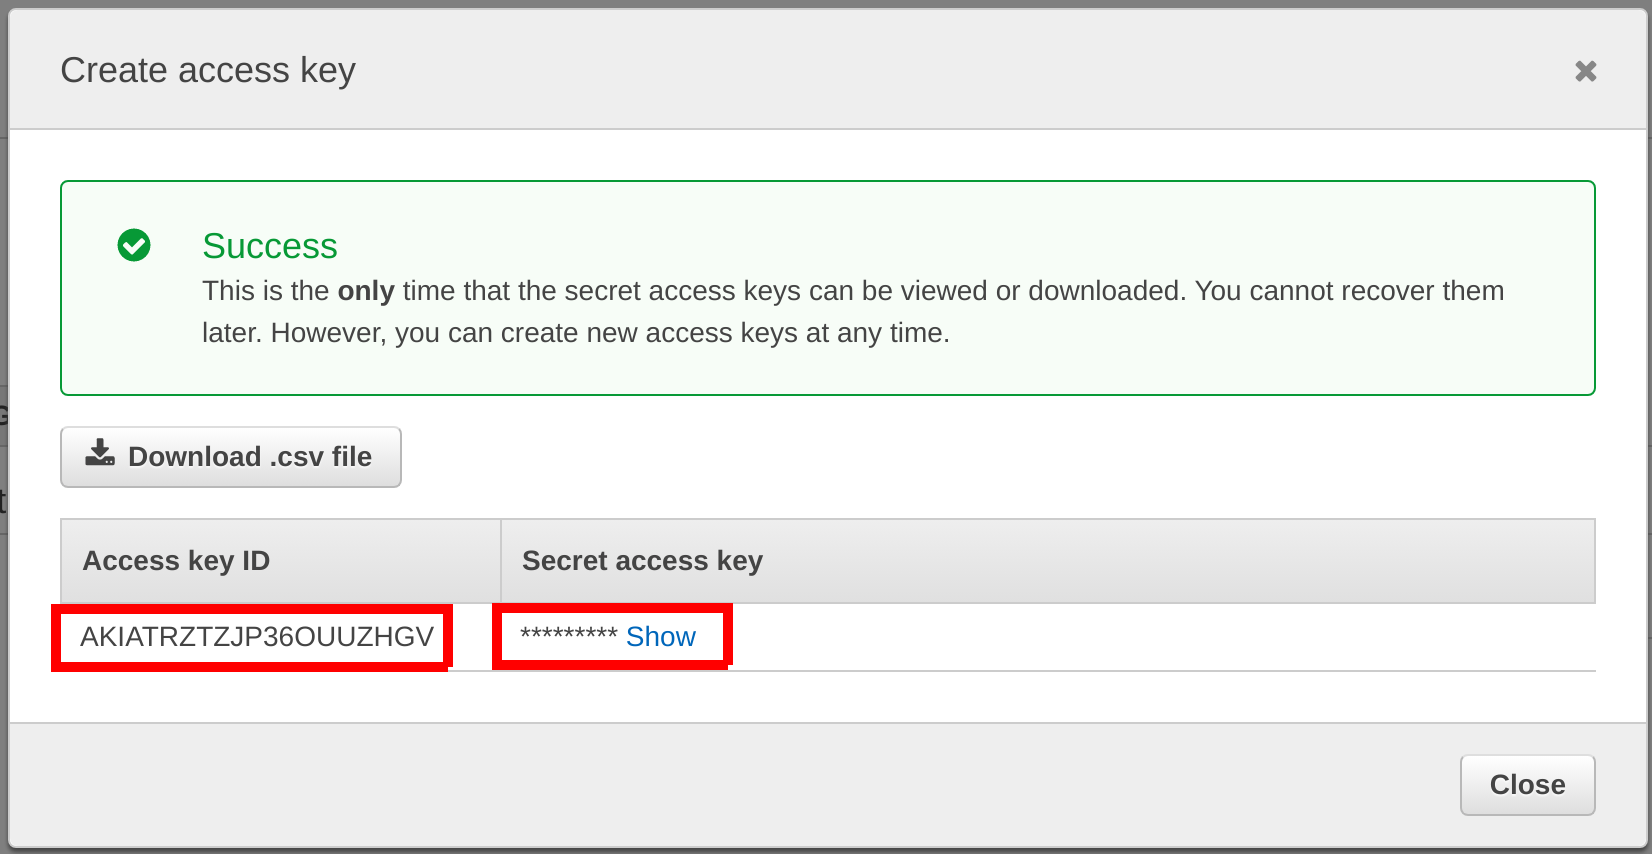 Configuring the access key on AWS step 3